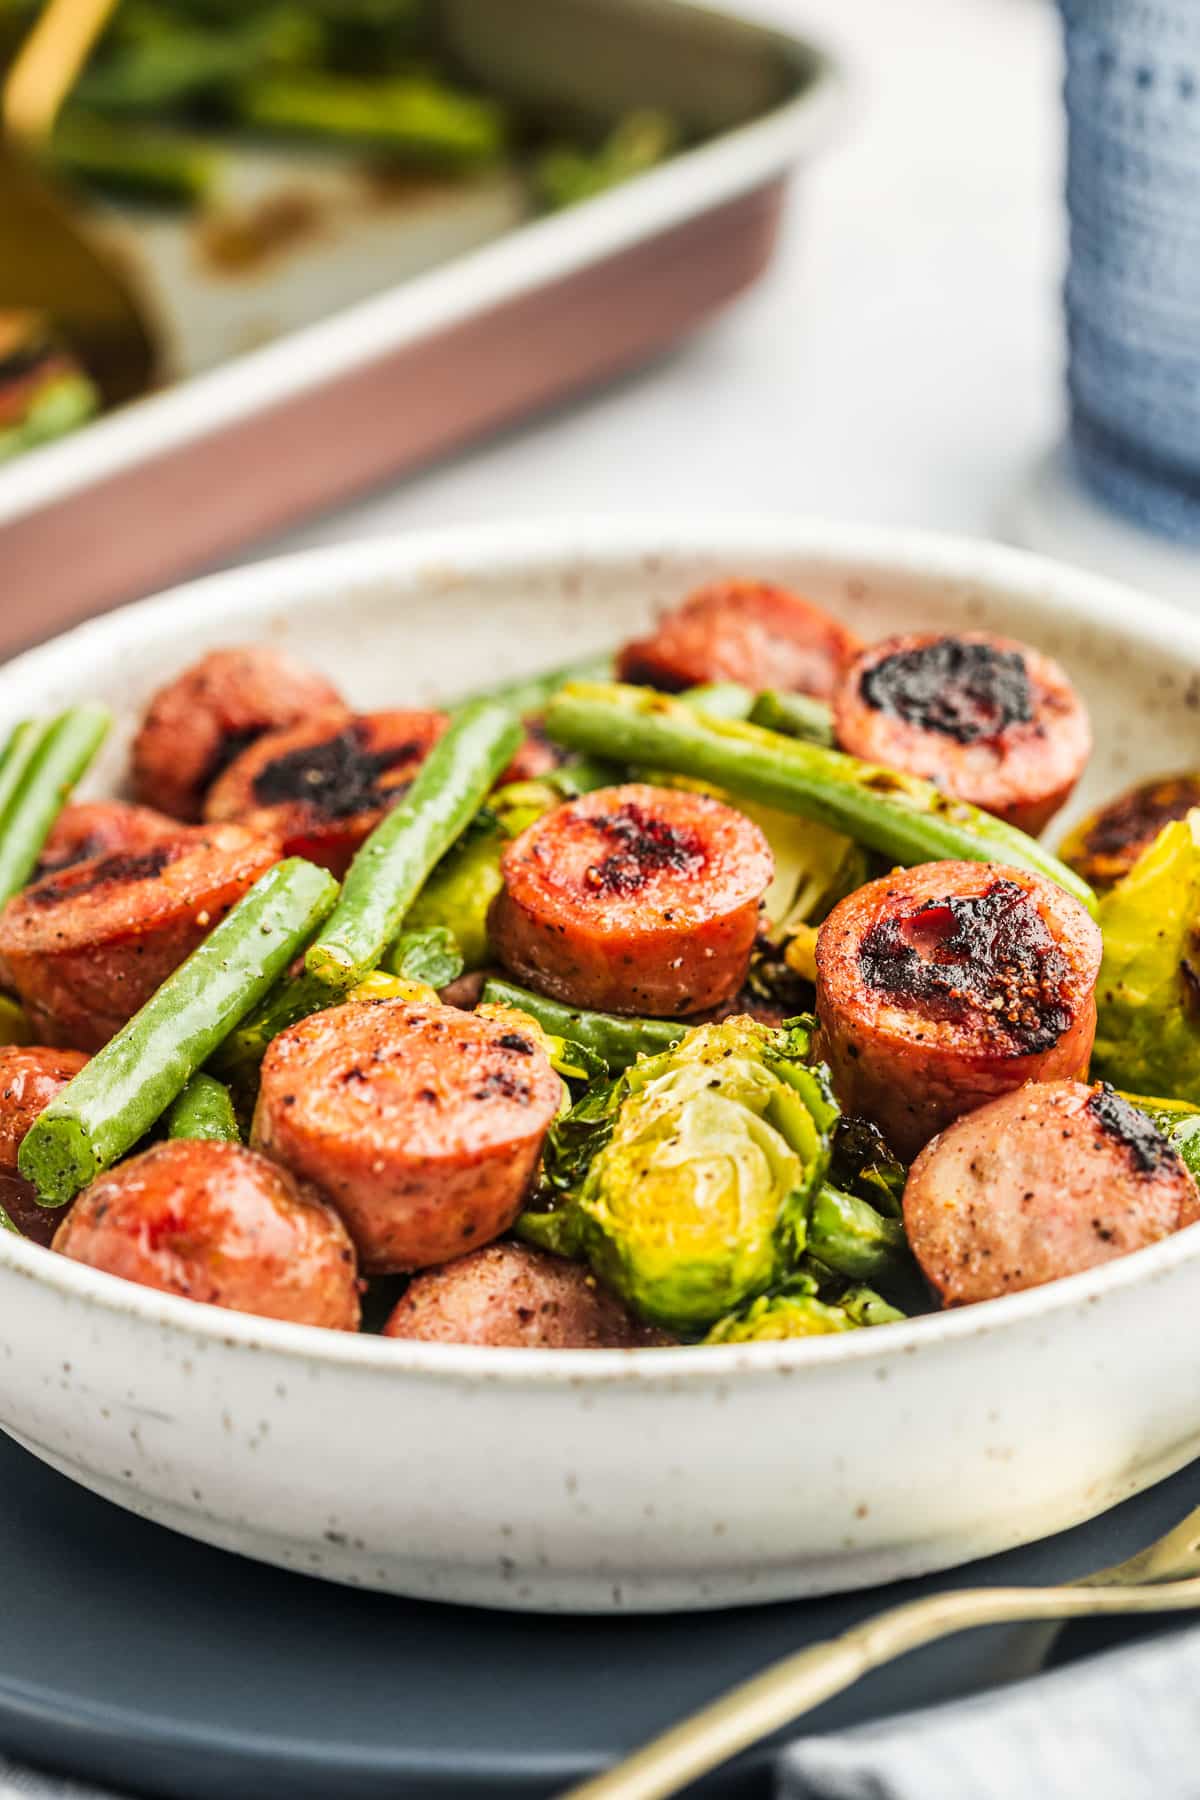 https://thewholecook.com/wp-content/uploads/2023/05/Sheet-Pan-Sausage-and-Vegetables-1.jpg